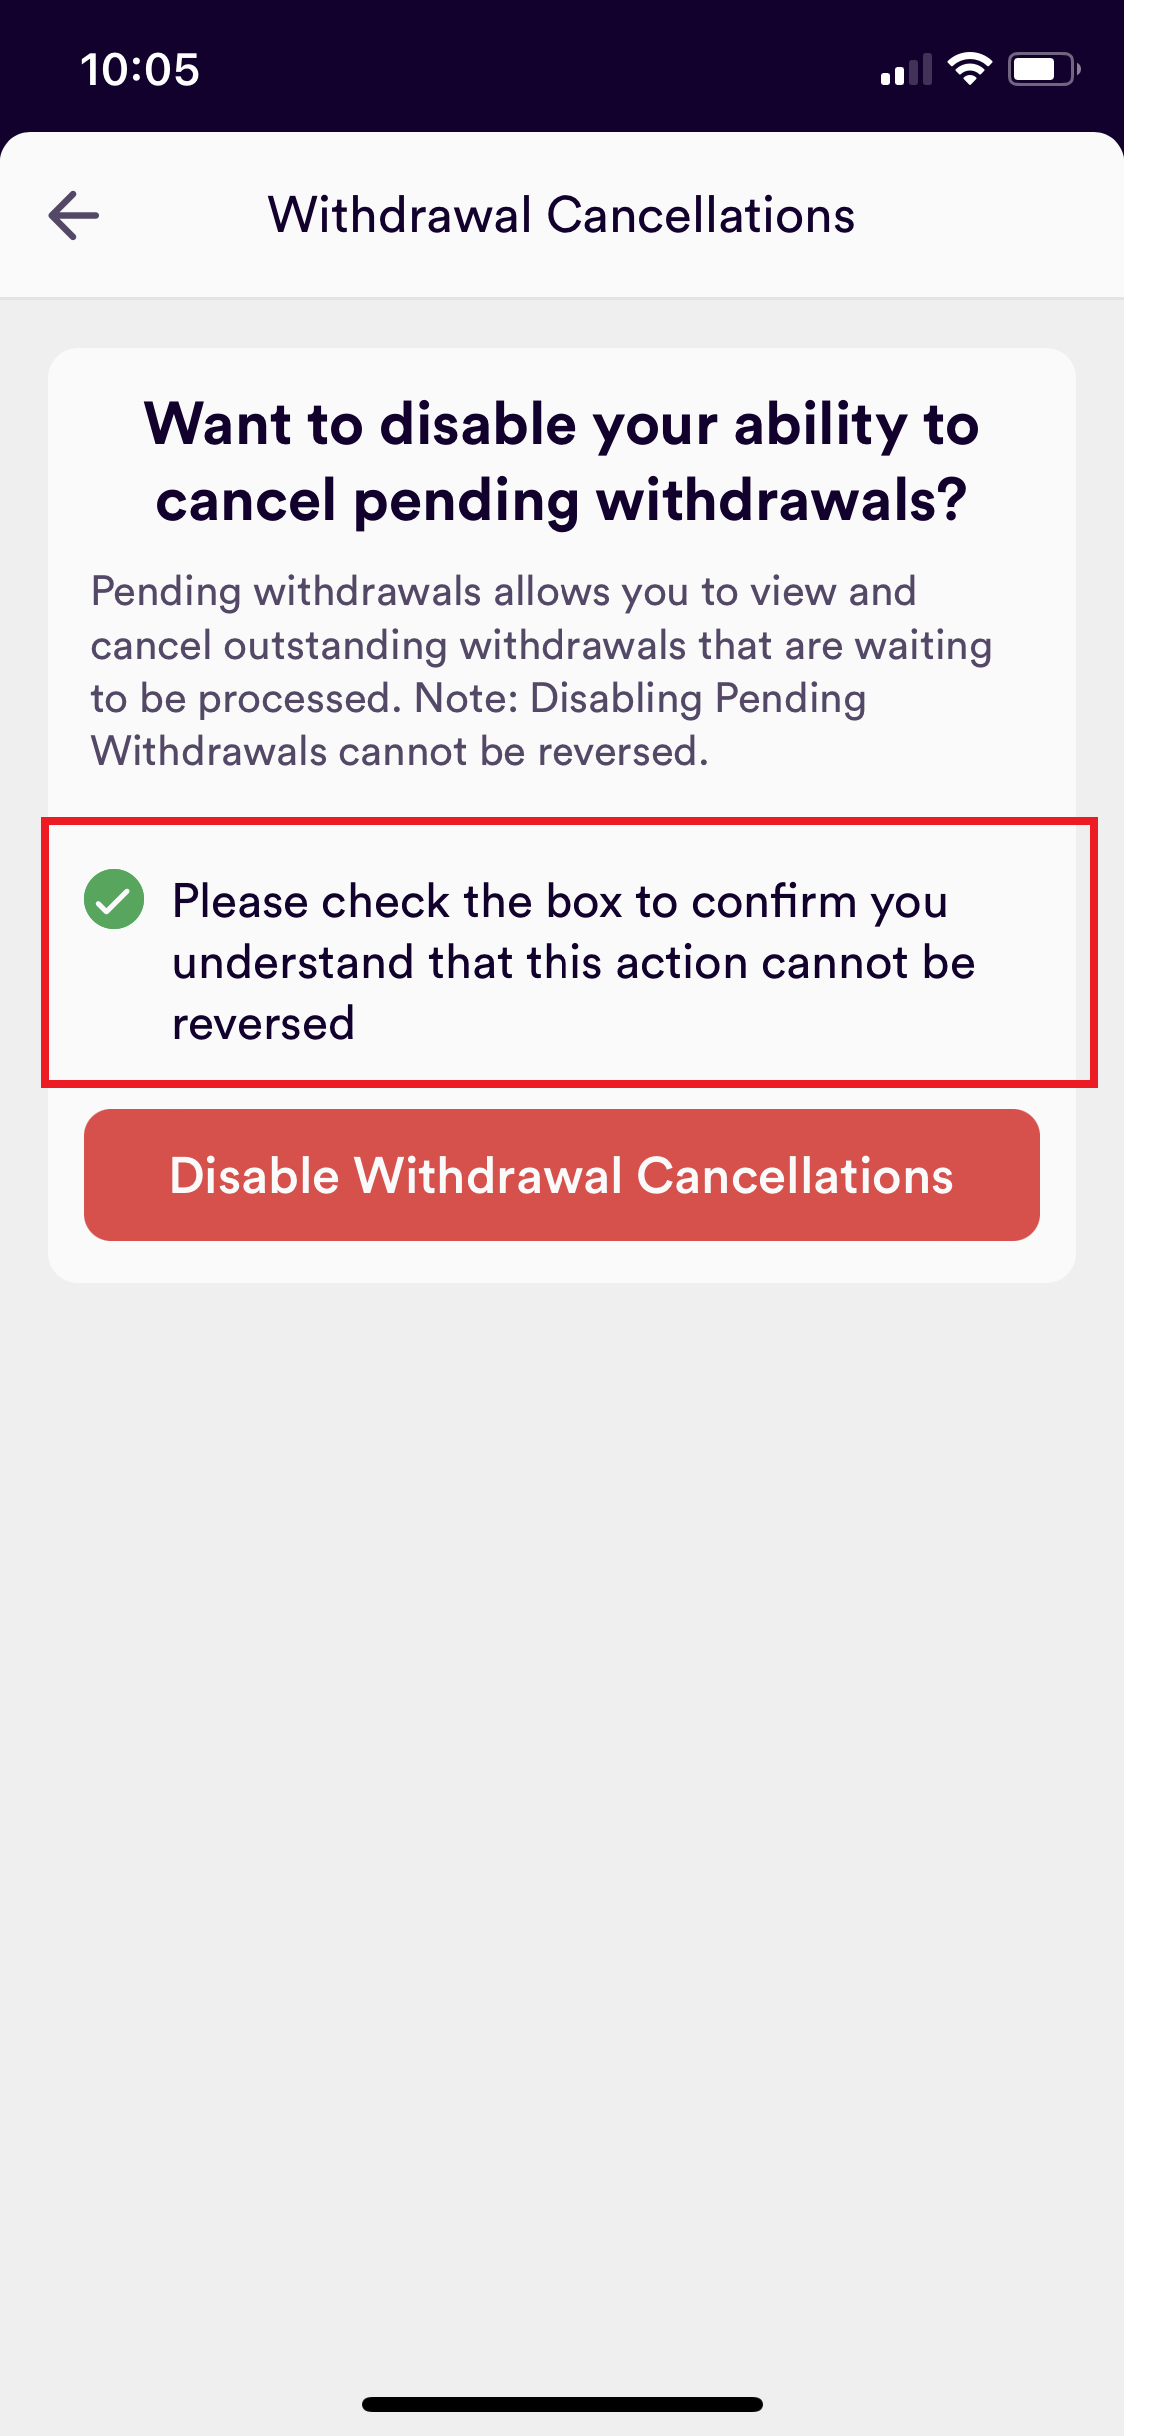 Withdrawal_Cancellations_3.png